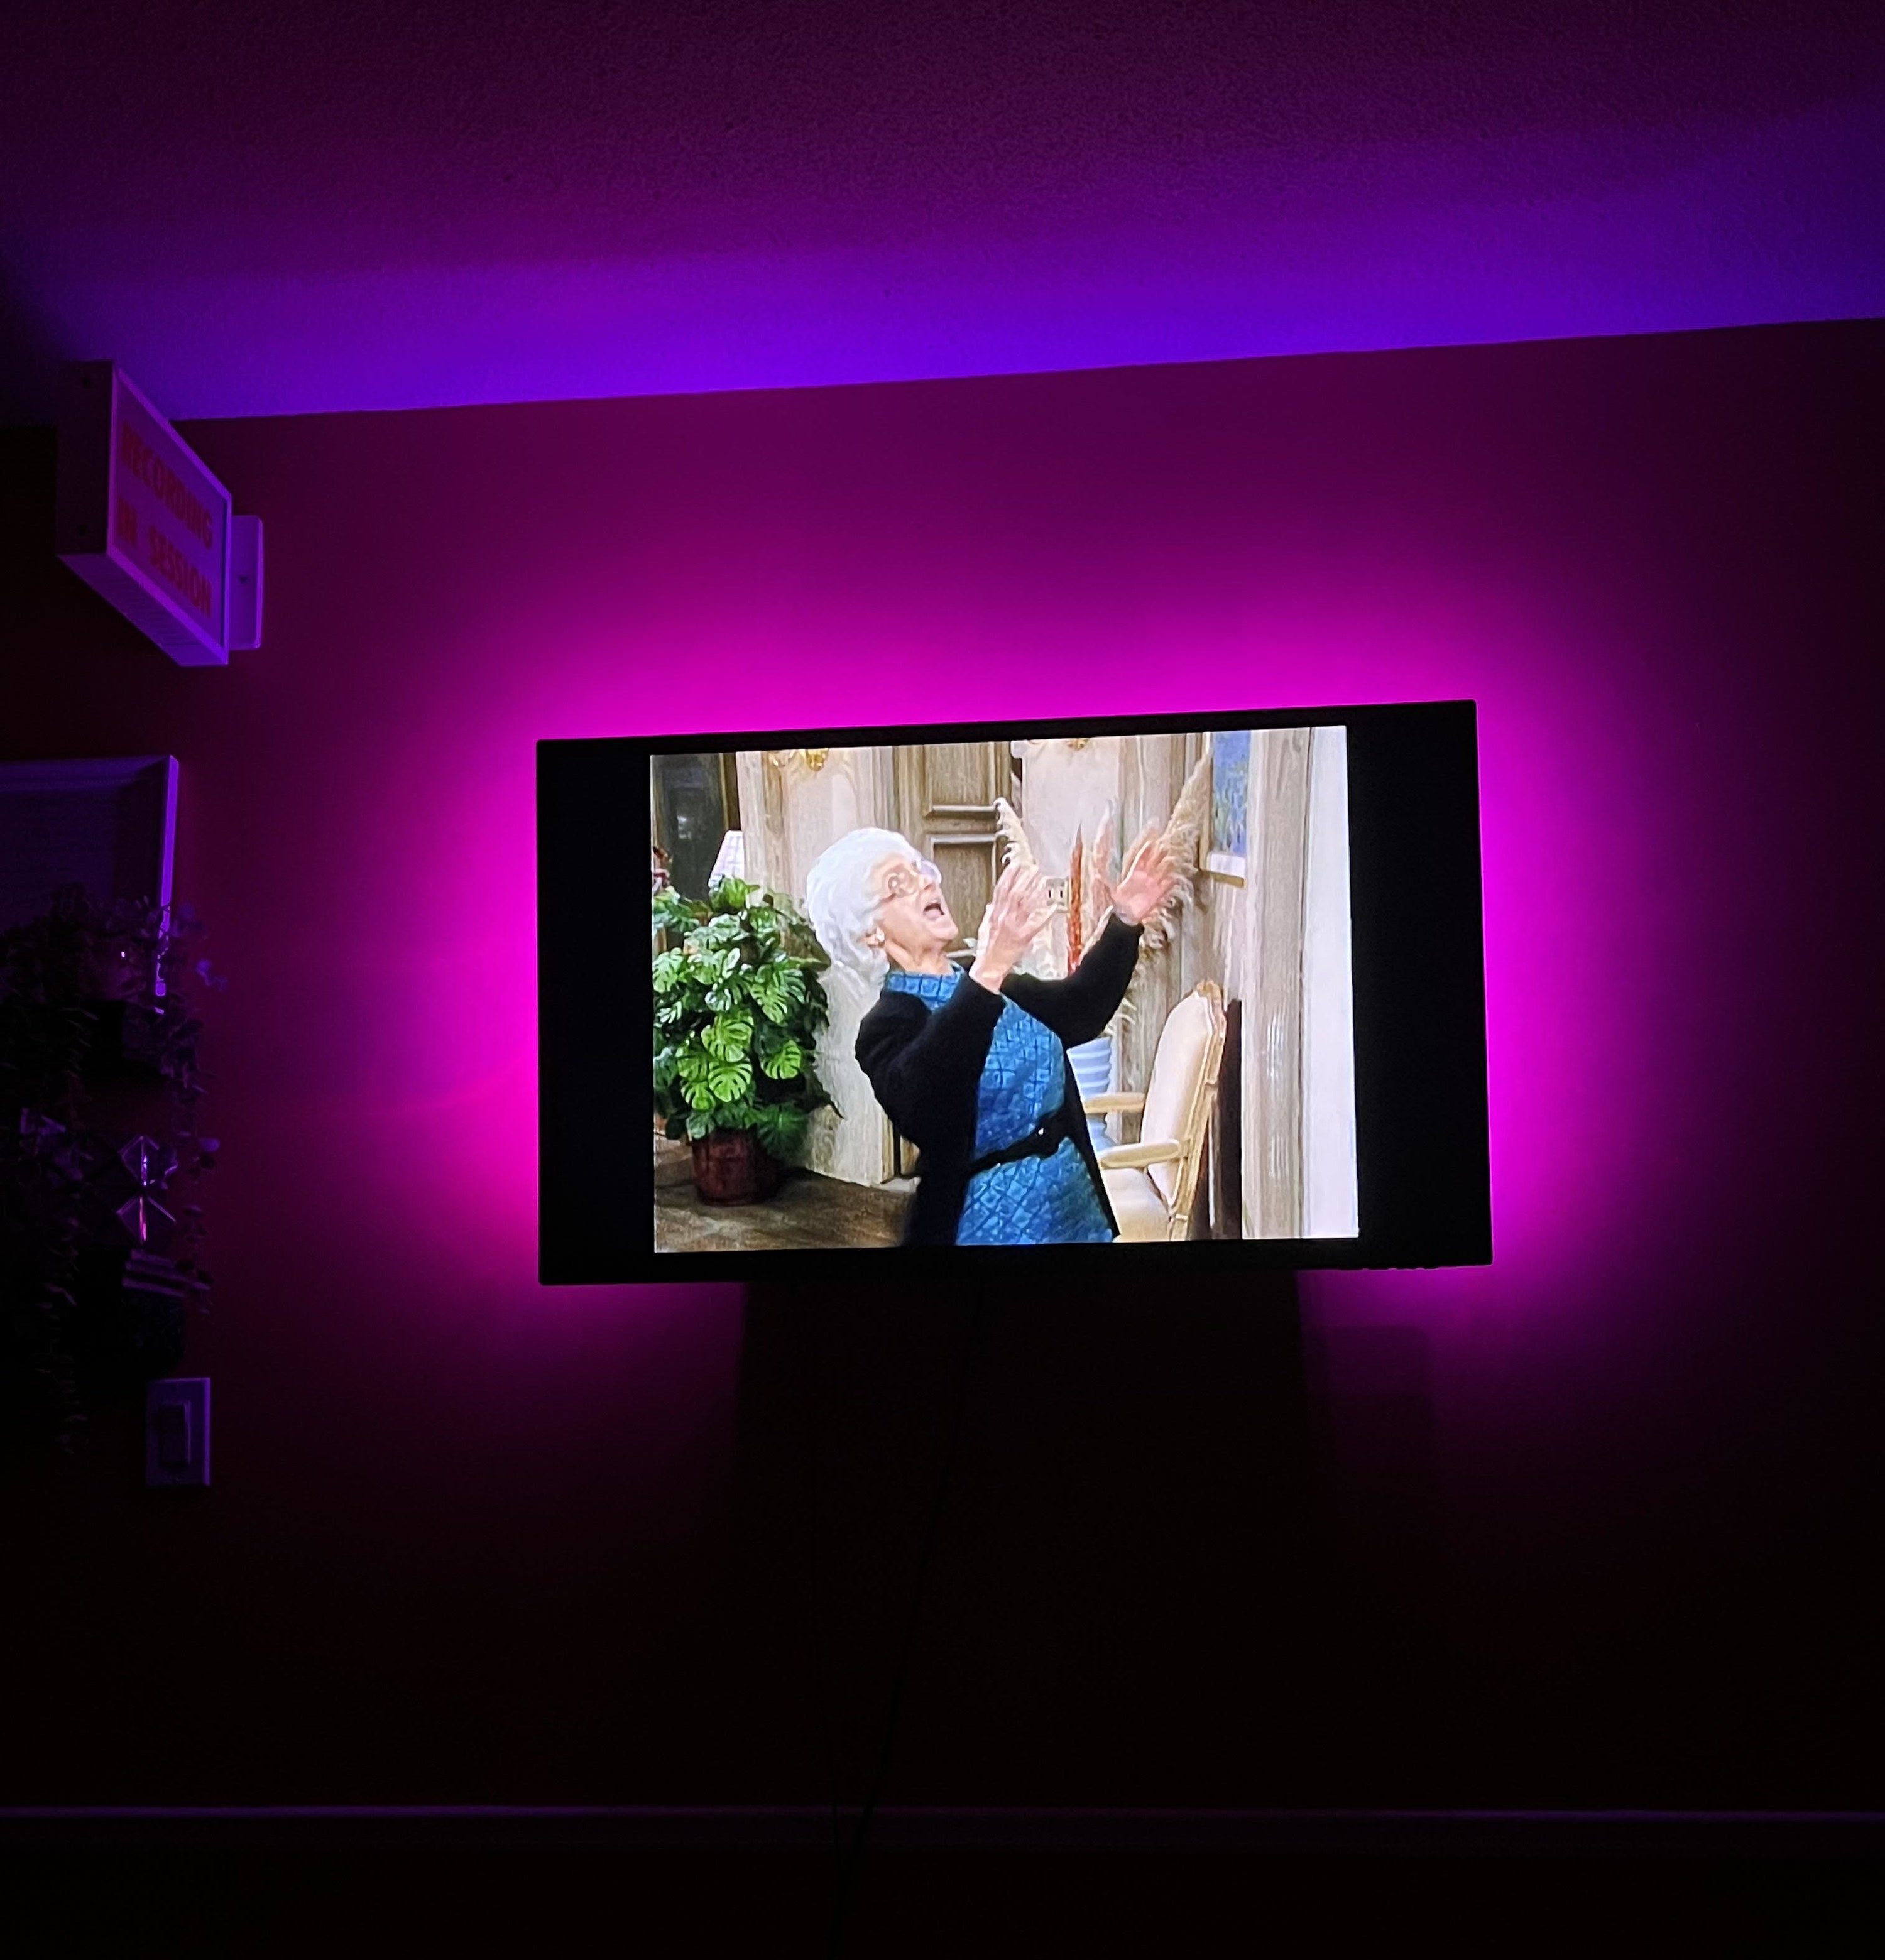 Bianca&#x27;s television at night playing an episode of The Golden Girls with the lights on behind her tv creating a glow around the screen